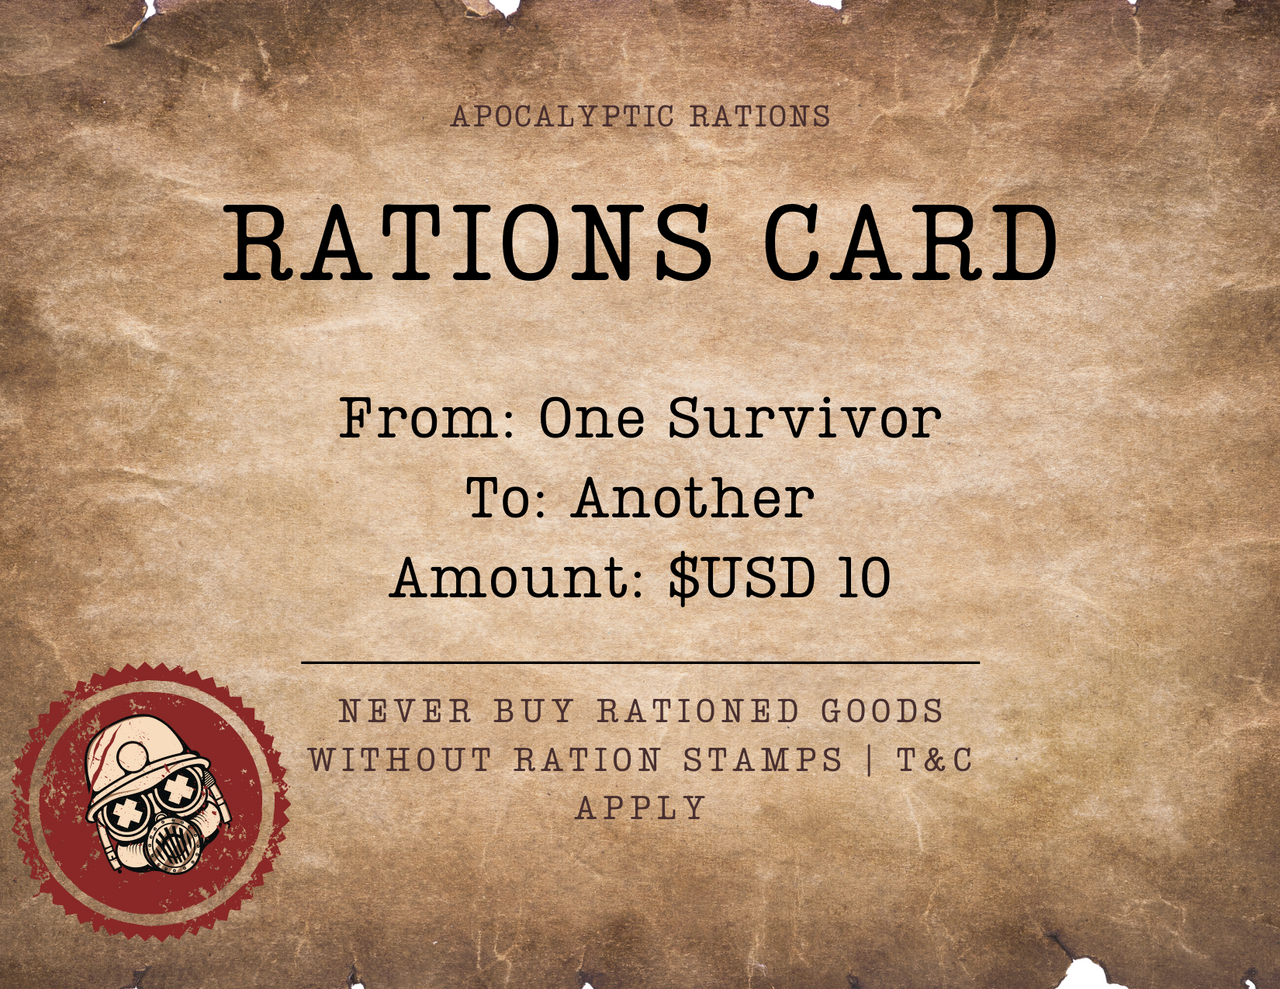 Rations card